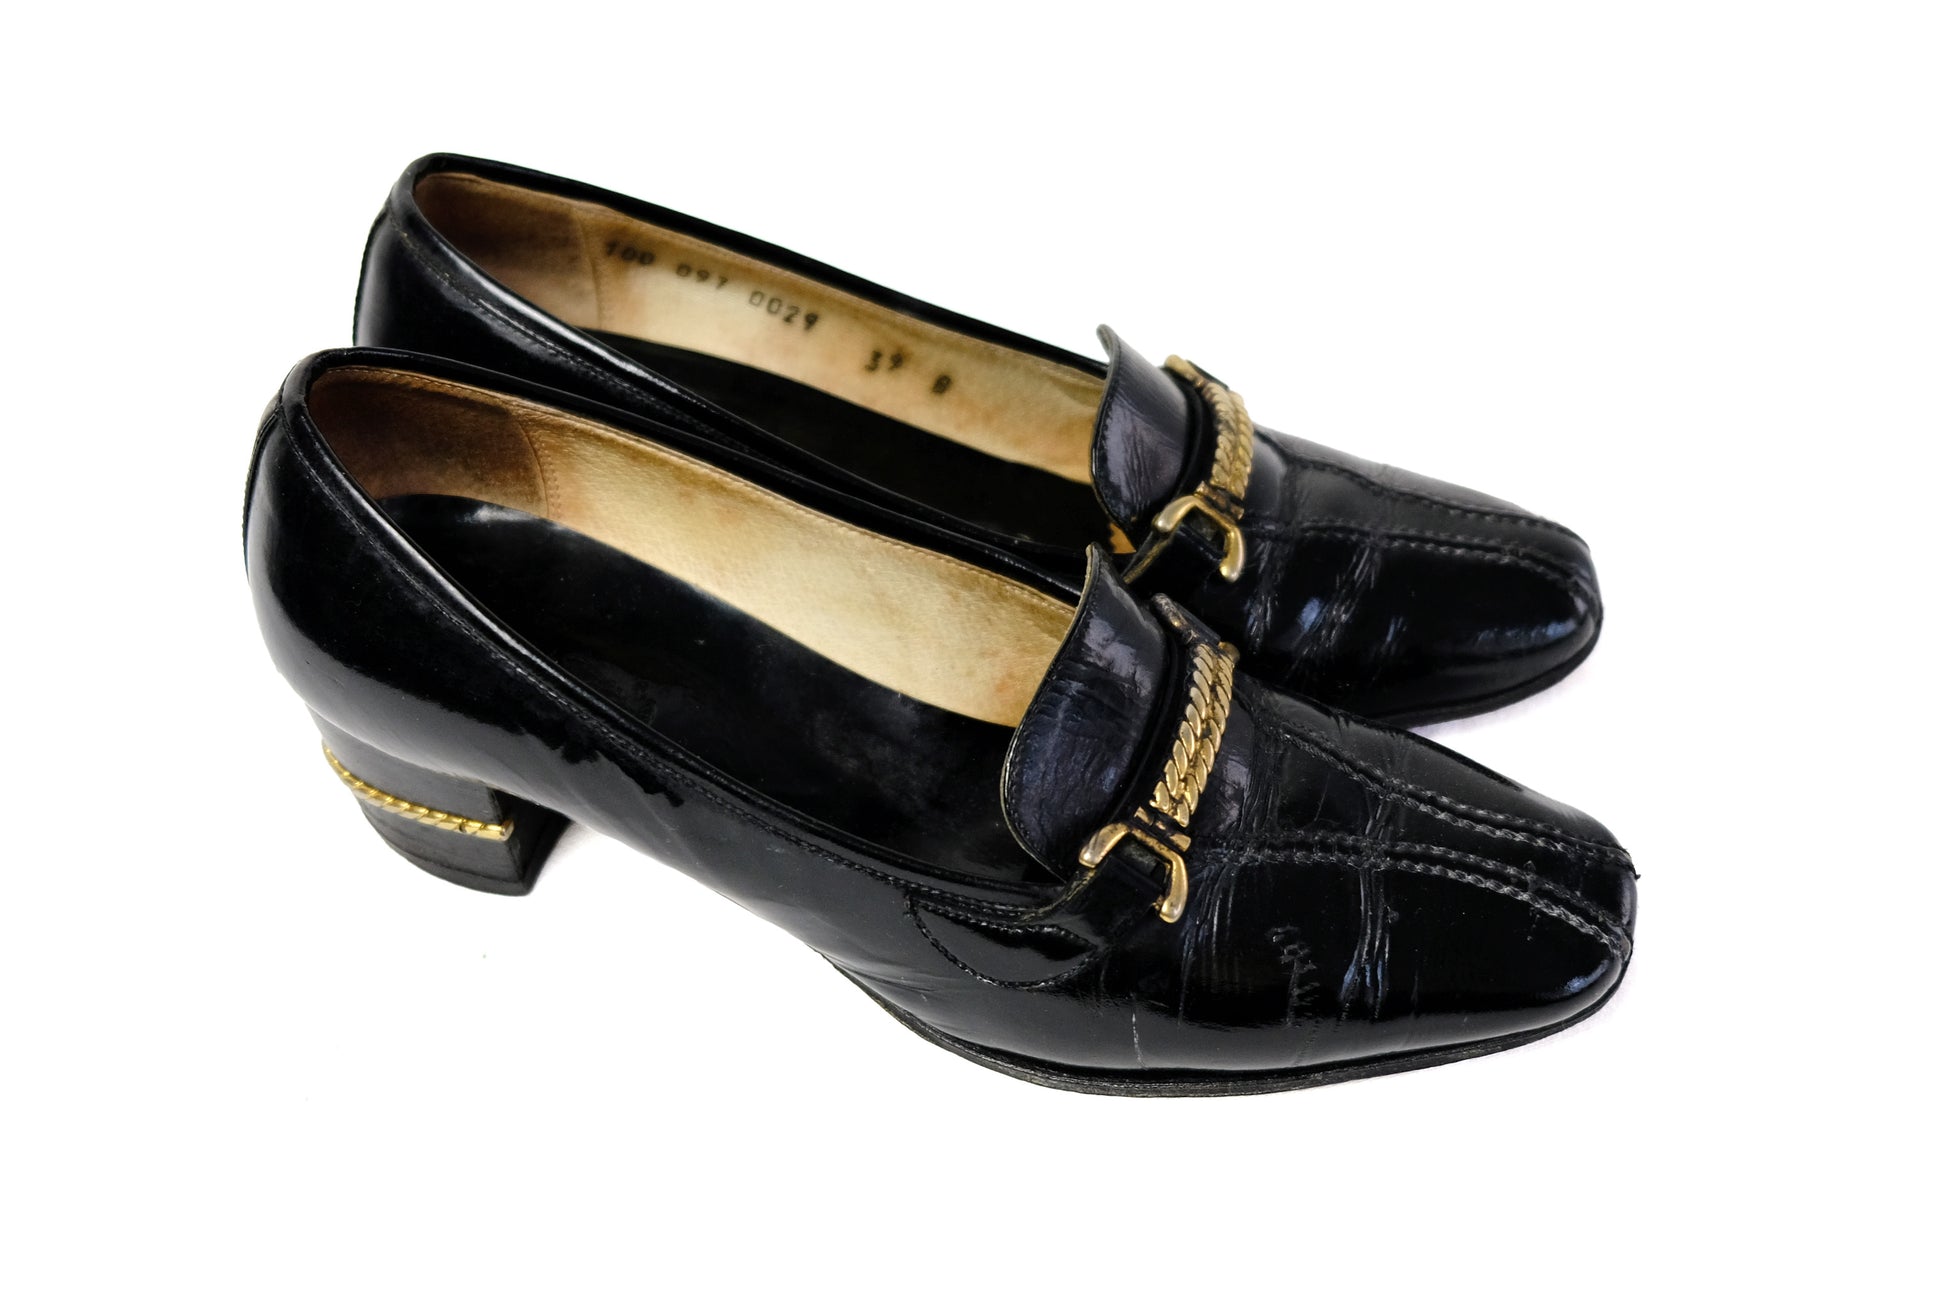 Gucci 1960s Vintage Shoes in Black Patent Leather with Gilt Chain Details, EU39